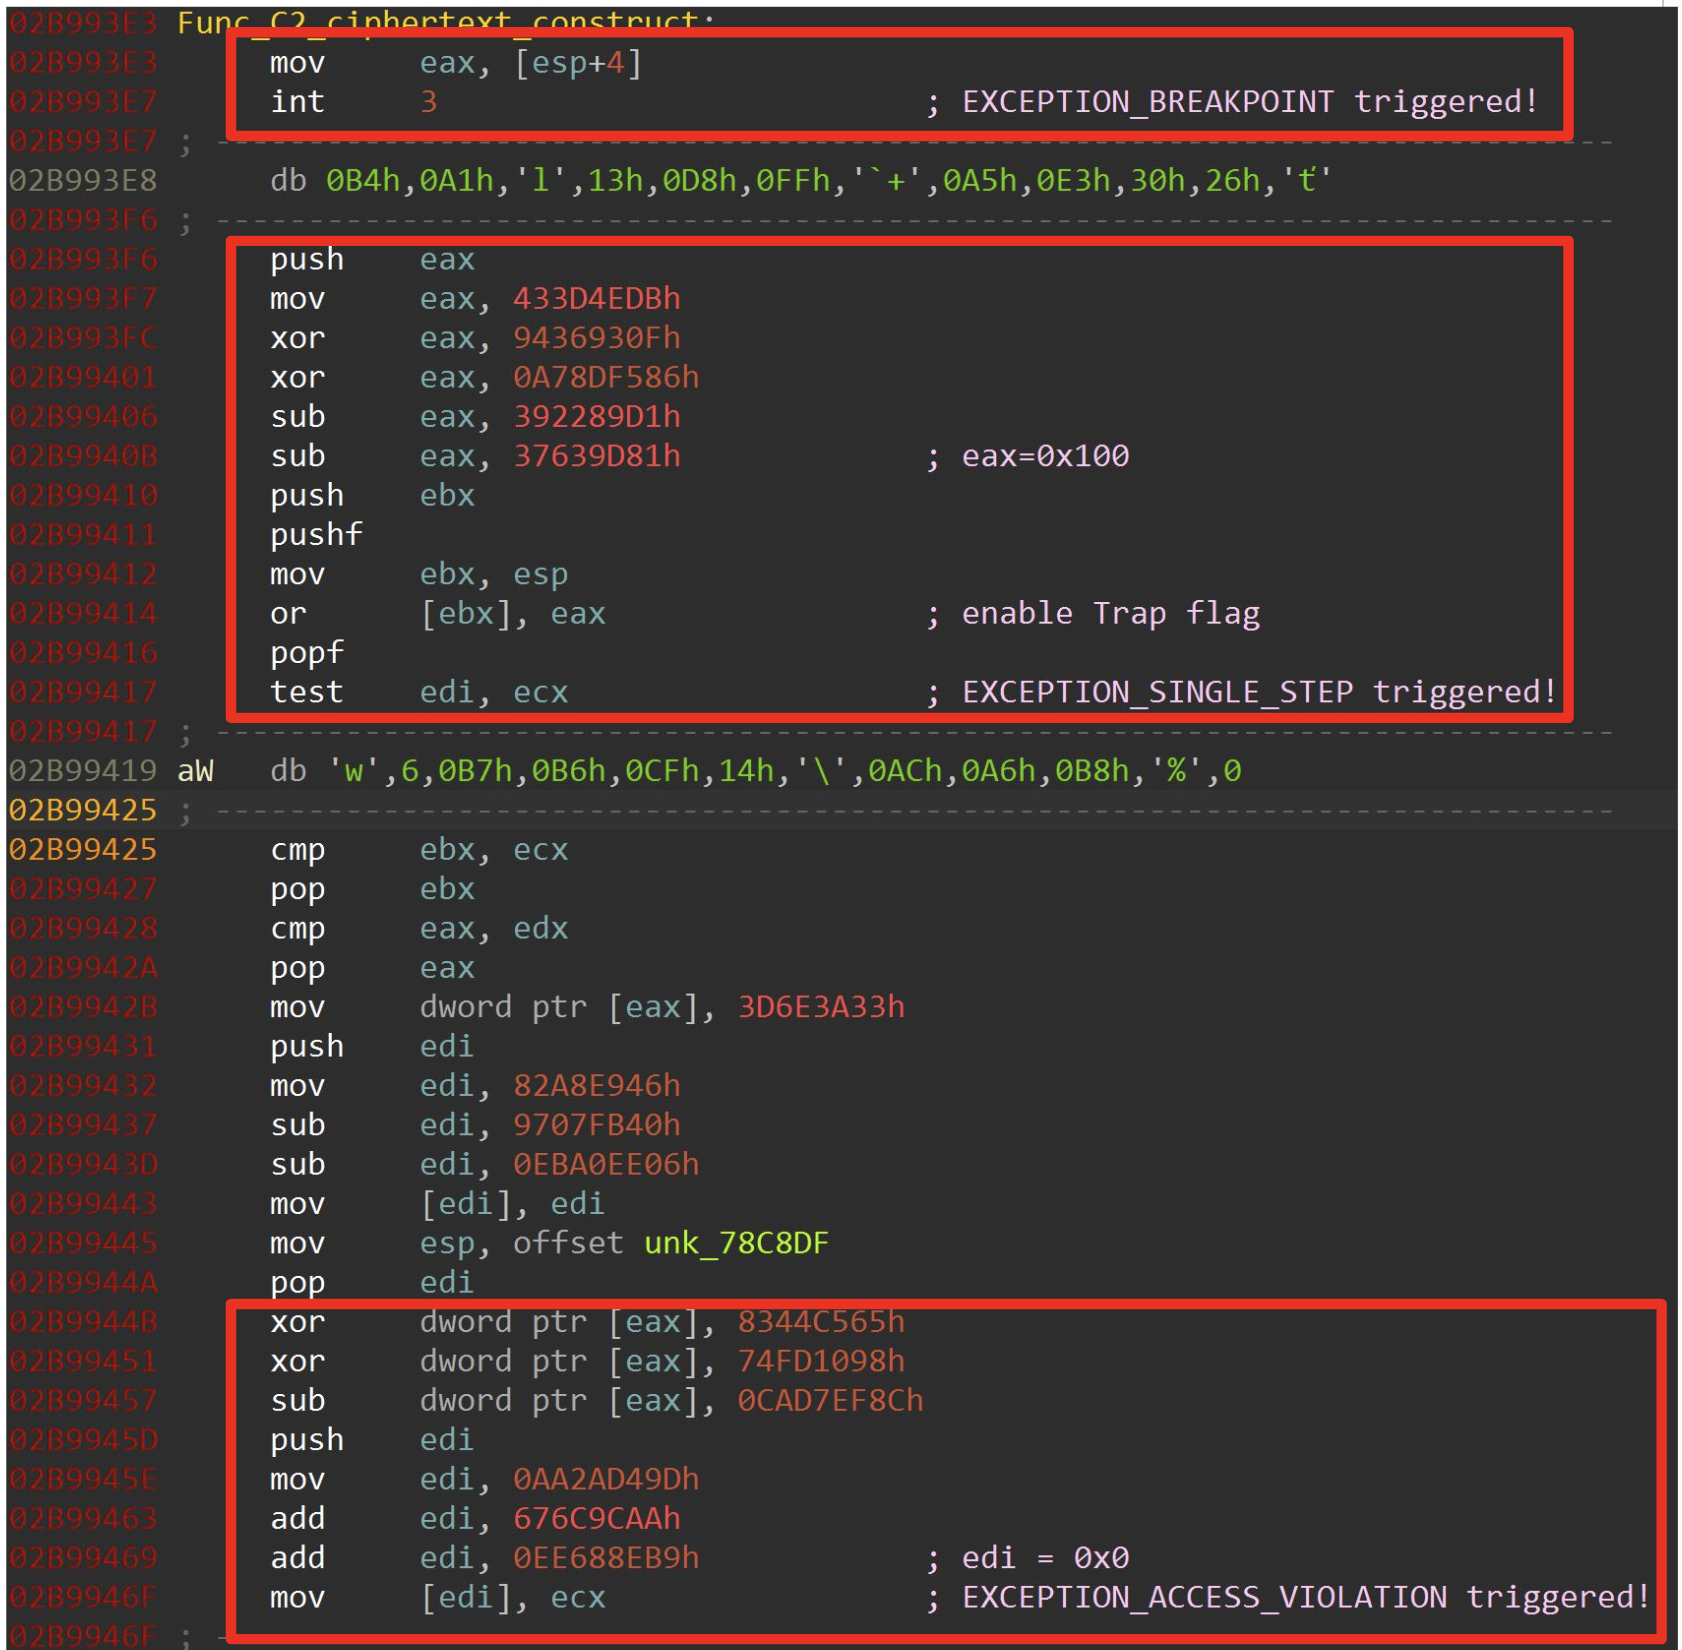 Image 4 is a screenshot of many lines of code in a GuLoader sample. Highlighted in red boxes are the anti-analysis instructions. 